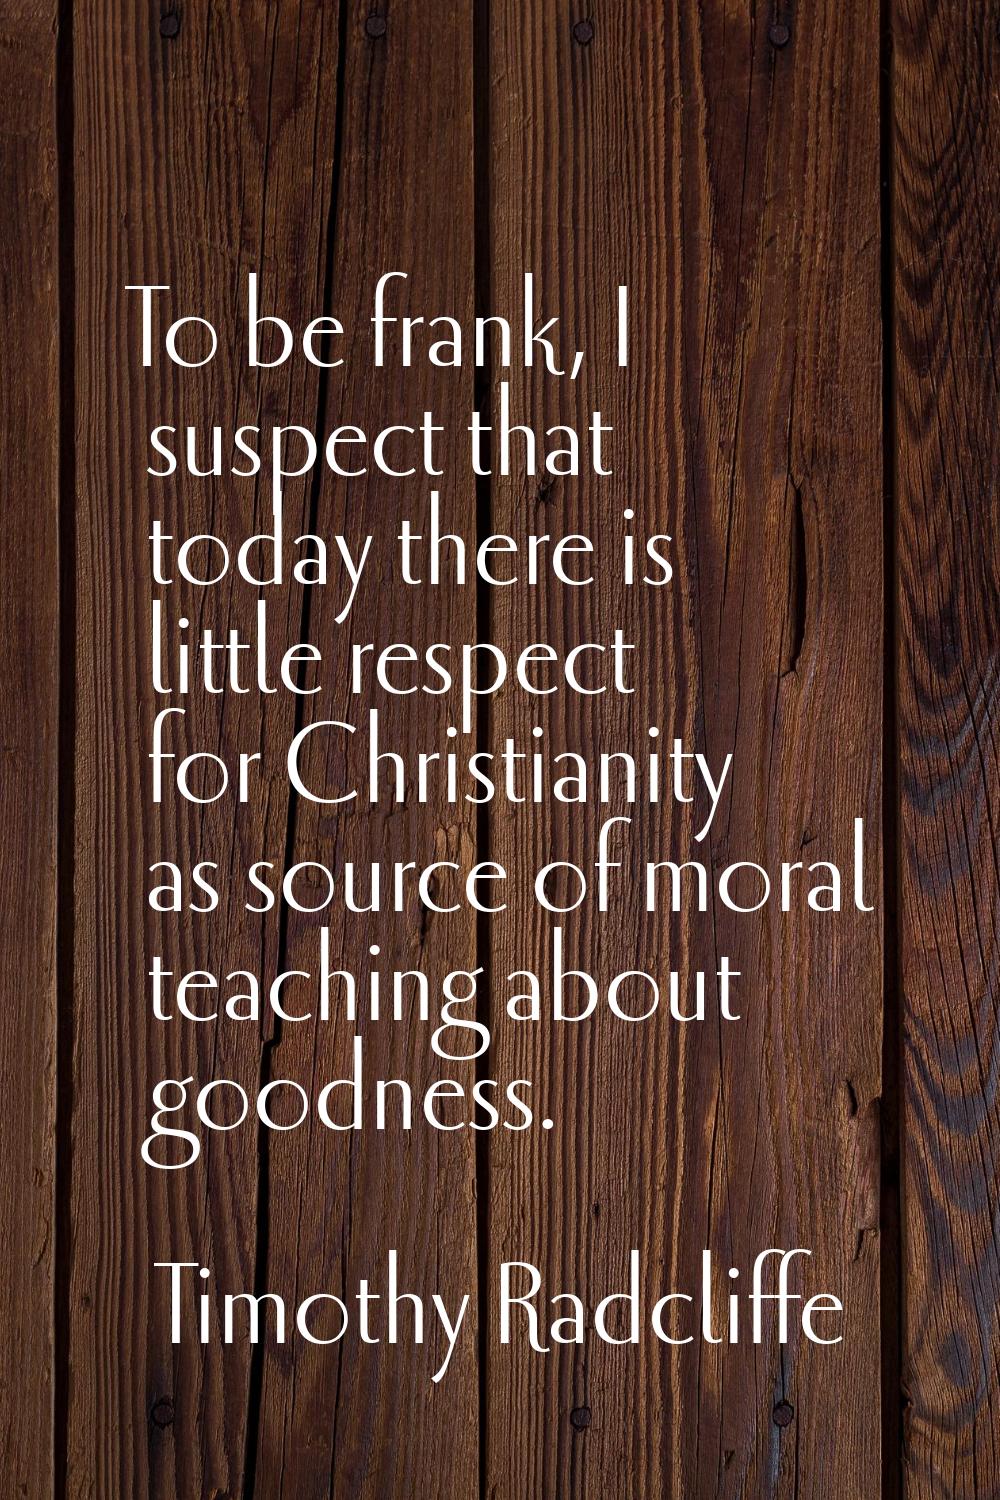 To be frank, I suspect that today there is little respect for Christianity as source of moral teach